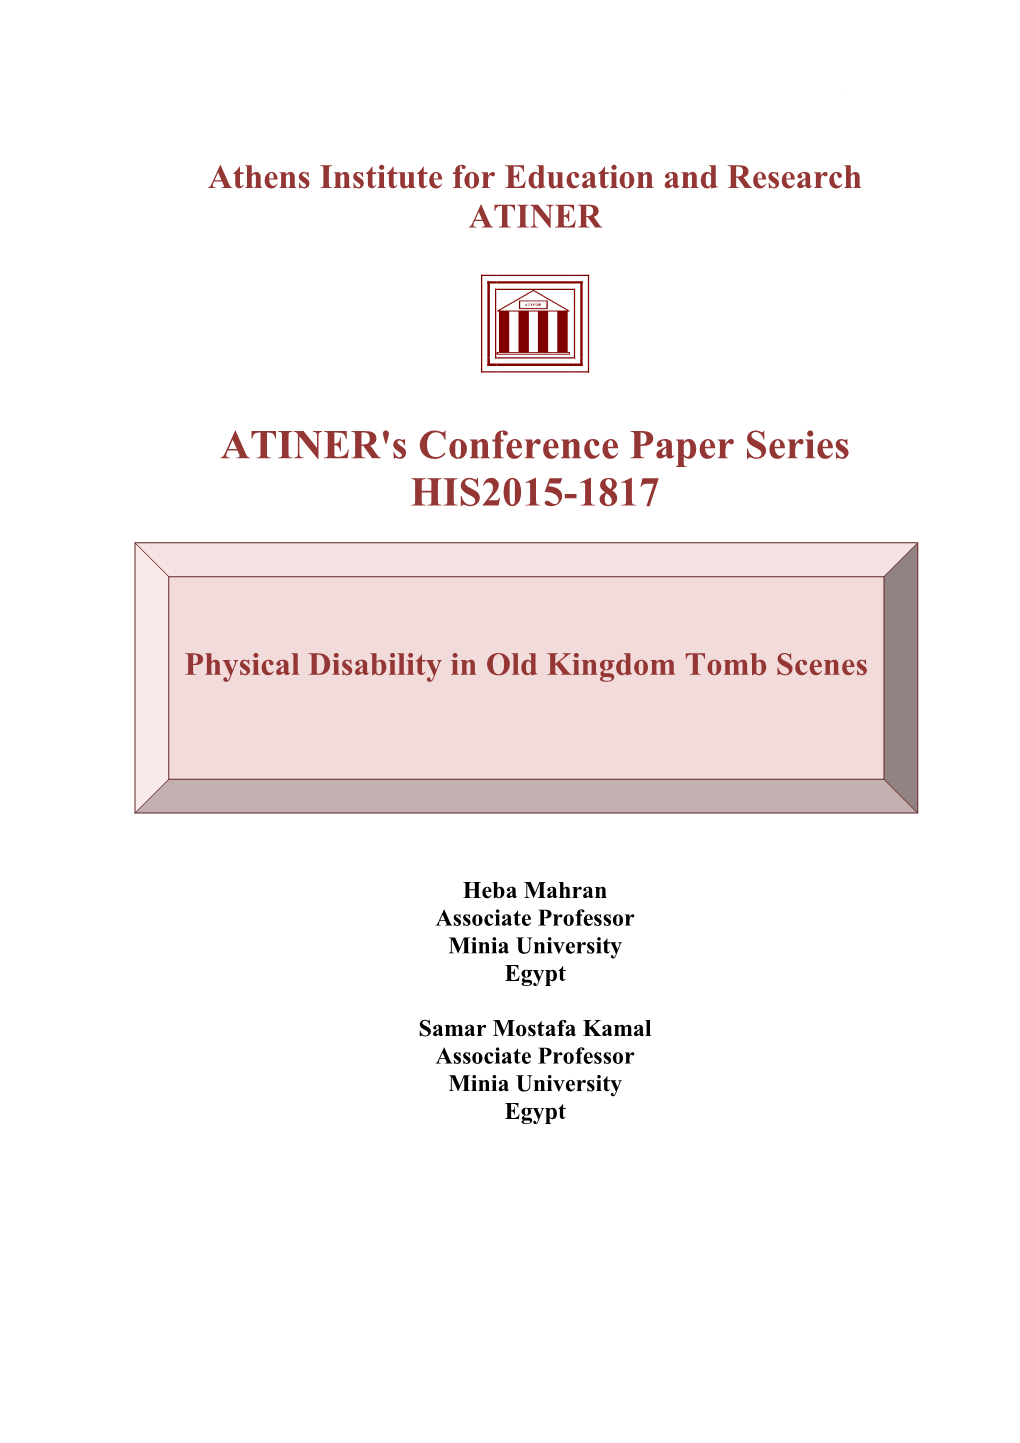 ATINER's Conference Paper Series HIS2015-1817